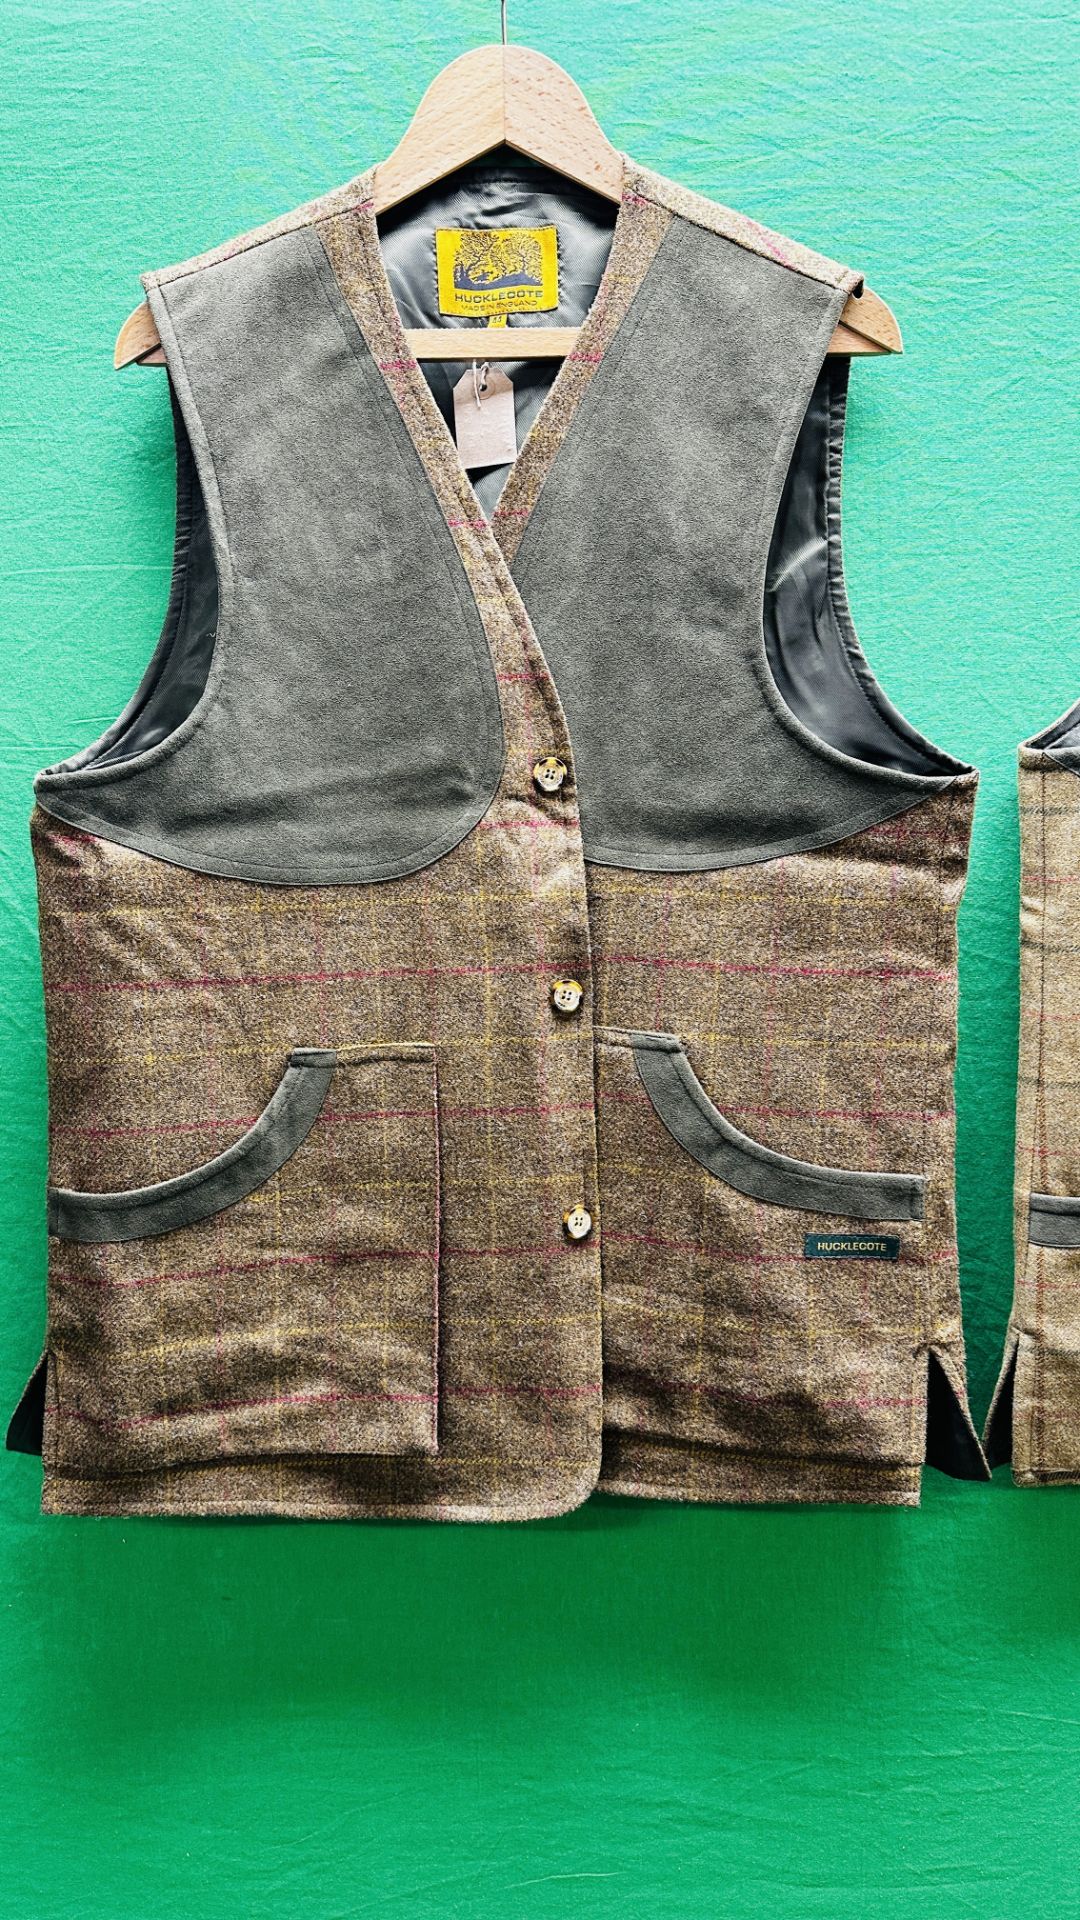 TWO SETS GENTLEMANS HUCKLECOAT TWEED WAISTCOAT SIZE 44 AND MATCHING BREECHES SIZE 40 PLUS - Image 3 of 5